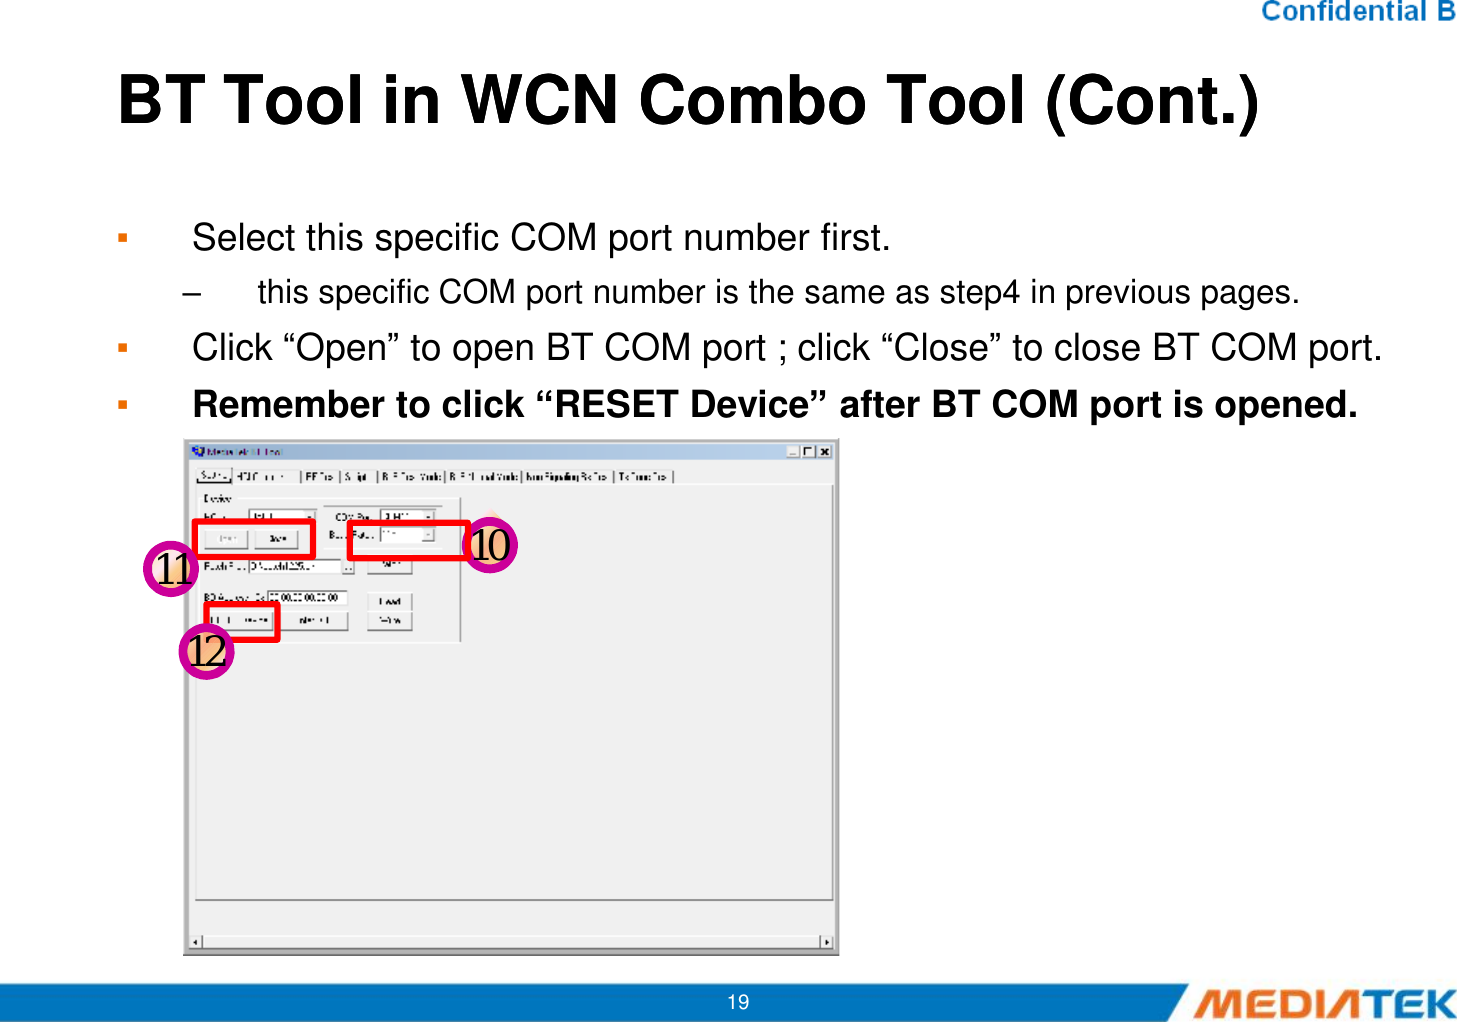 BT Tool in WCN Combo Tool (Cont.)BT Tool in WCN Combo Tool (Cont.)▪Select this specific COM port number first.–this specific COM port number is the same as step4 in previous pages.▪Click “Open” to open BT COM port ; click “Close” to close BT COM port.▪Remember to click “RESET Device” after BT COM port is opened. 19101112